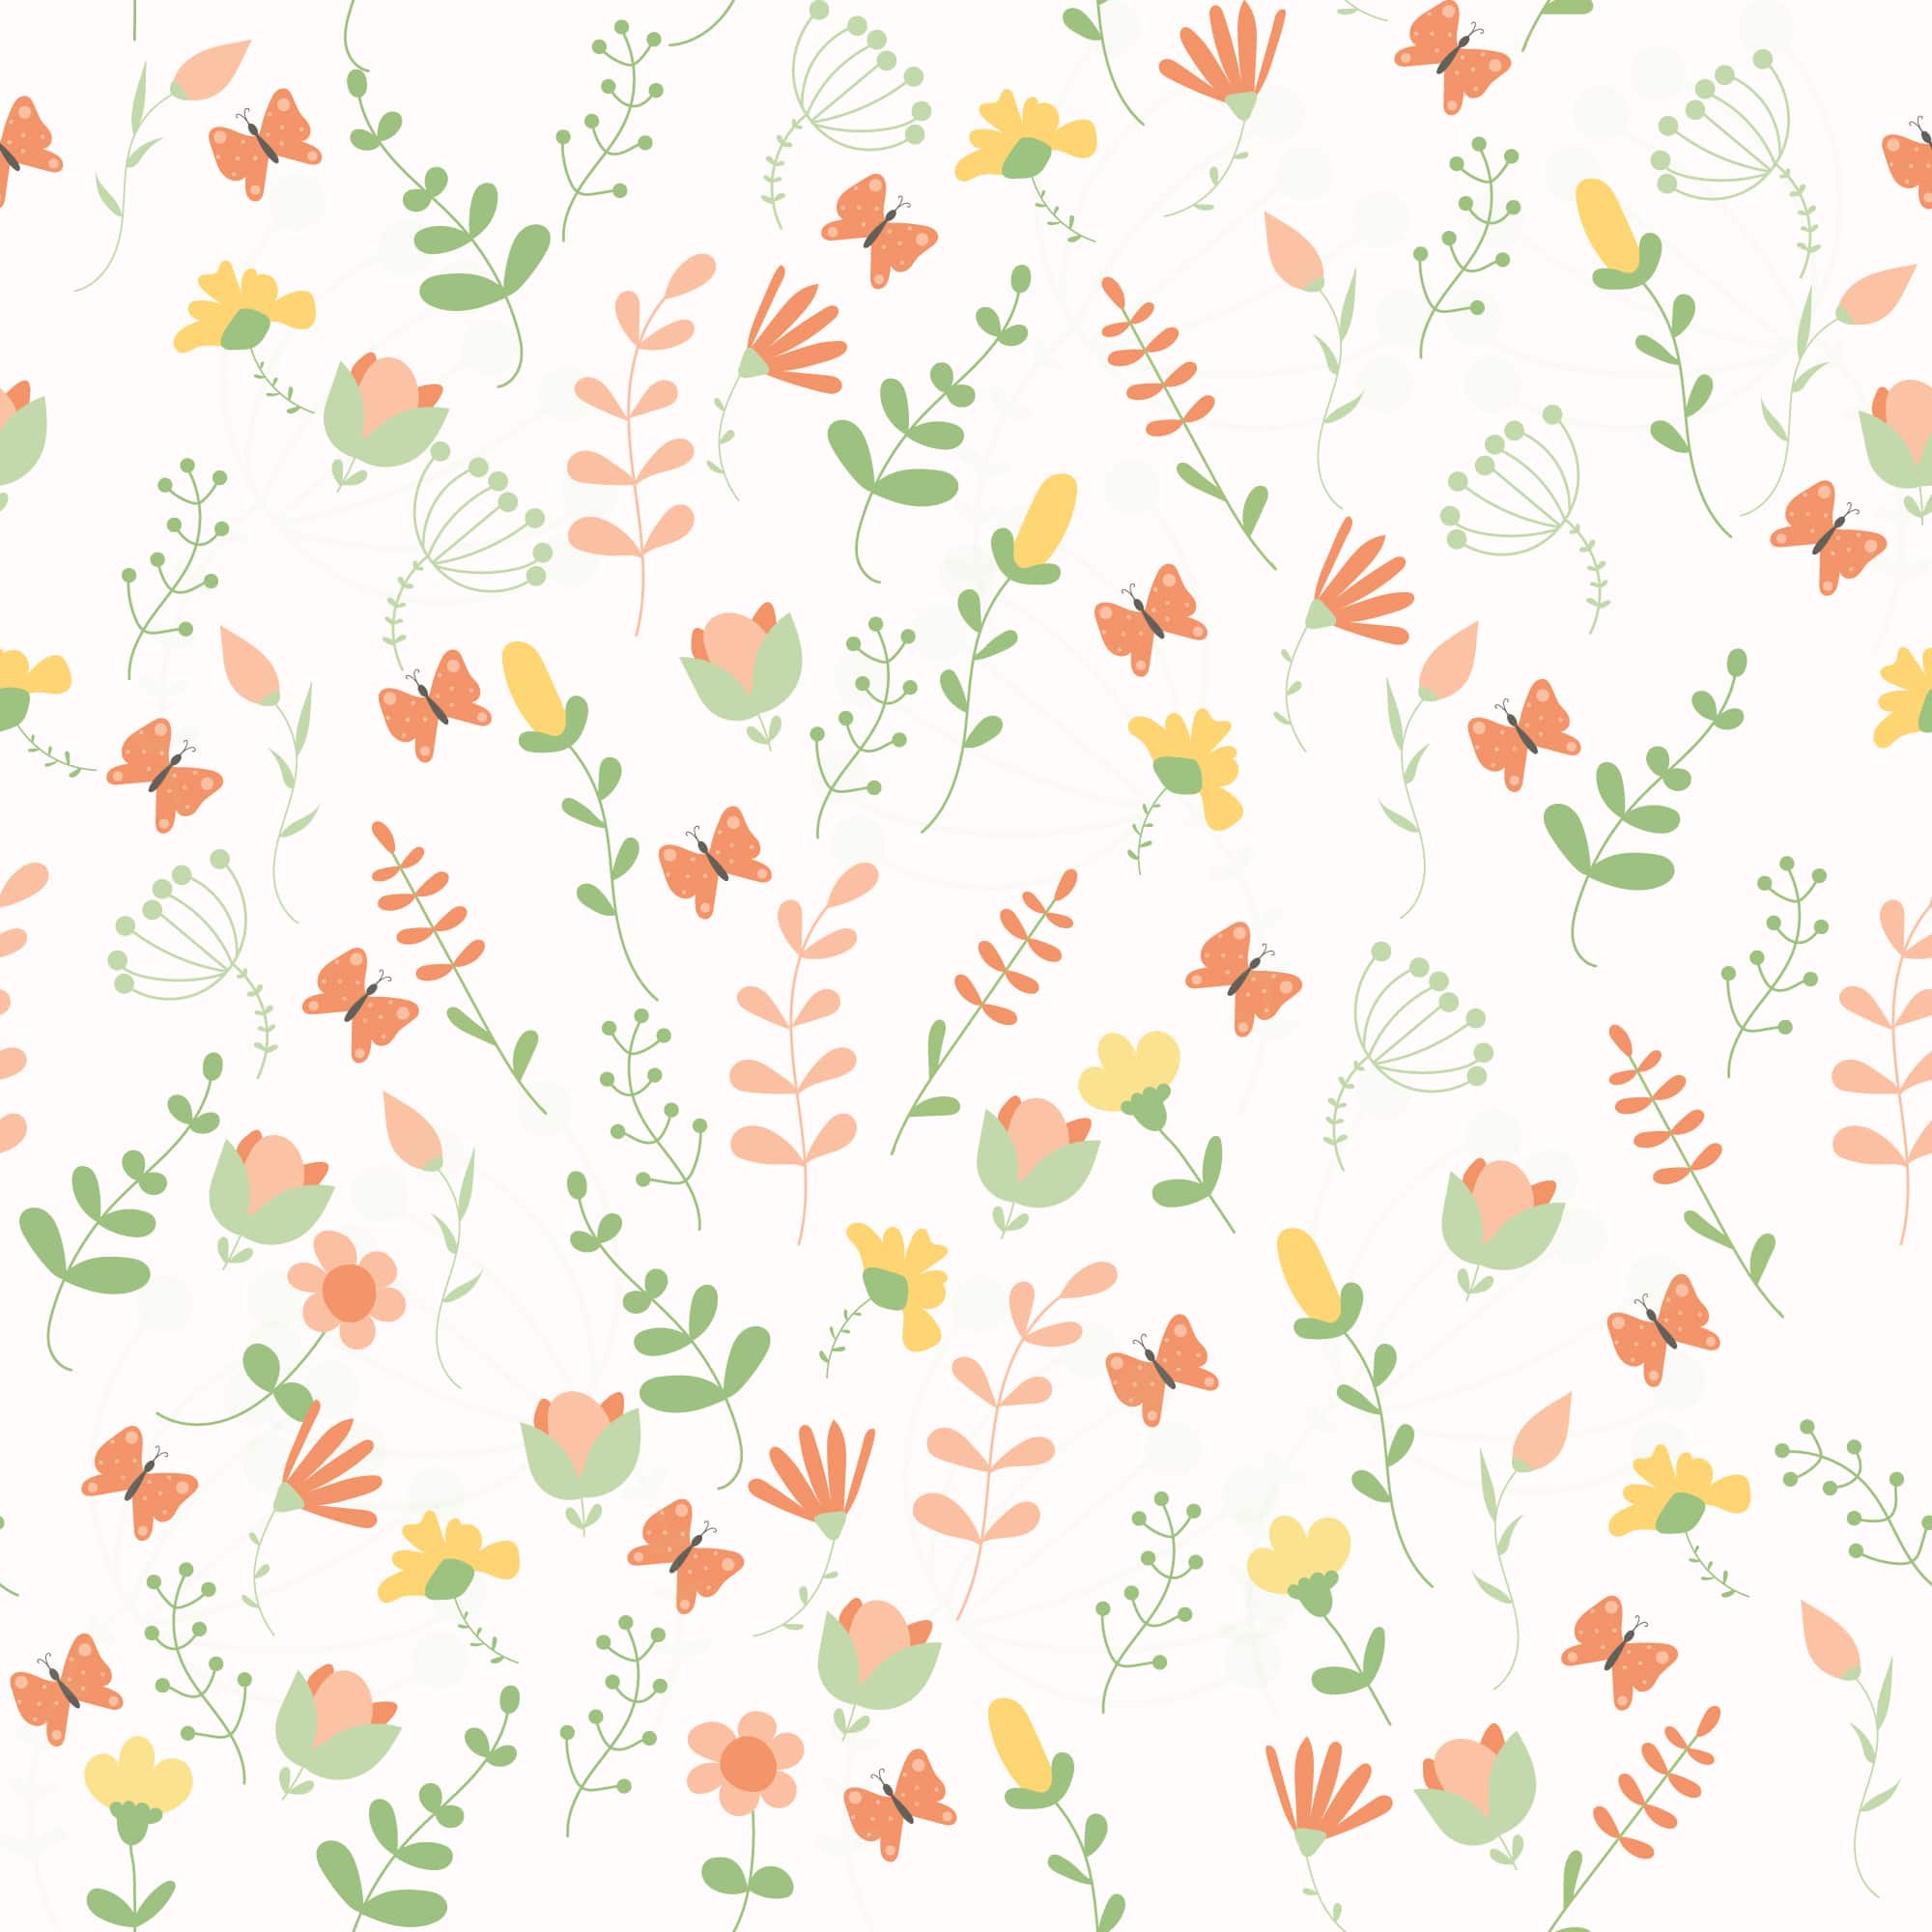 A pattern of flowers and leaves - Pastel orange